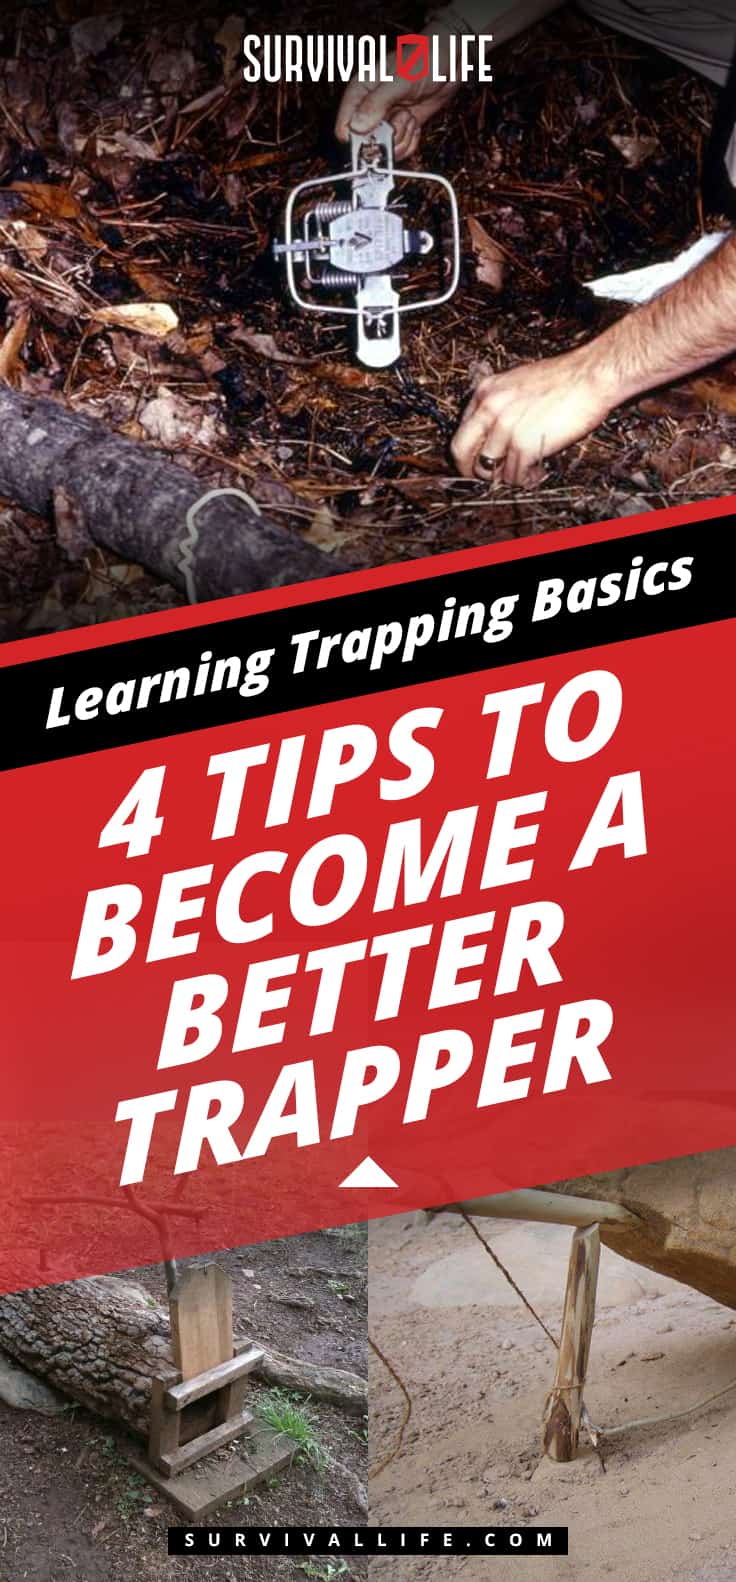 Placard | Tips To Become A Better Trapper | Learning Trapping Basics